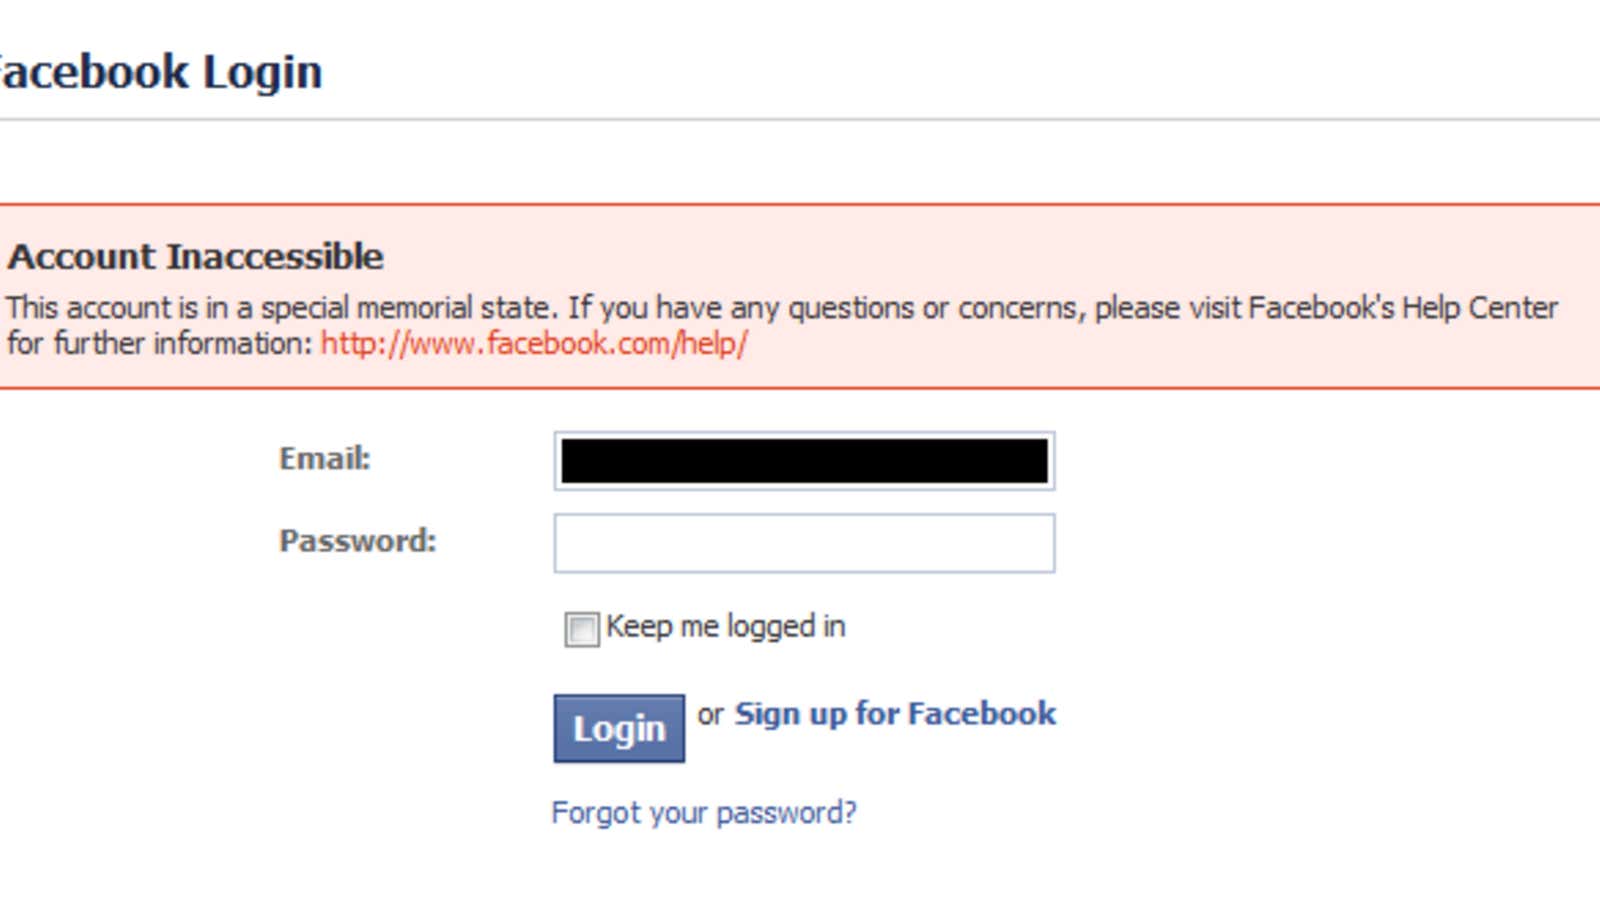 Example of a login attempt on a memorialized Facebook account